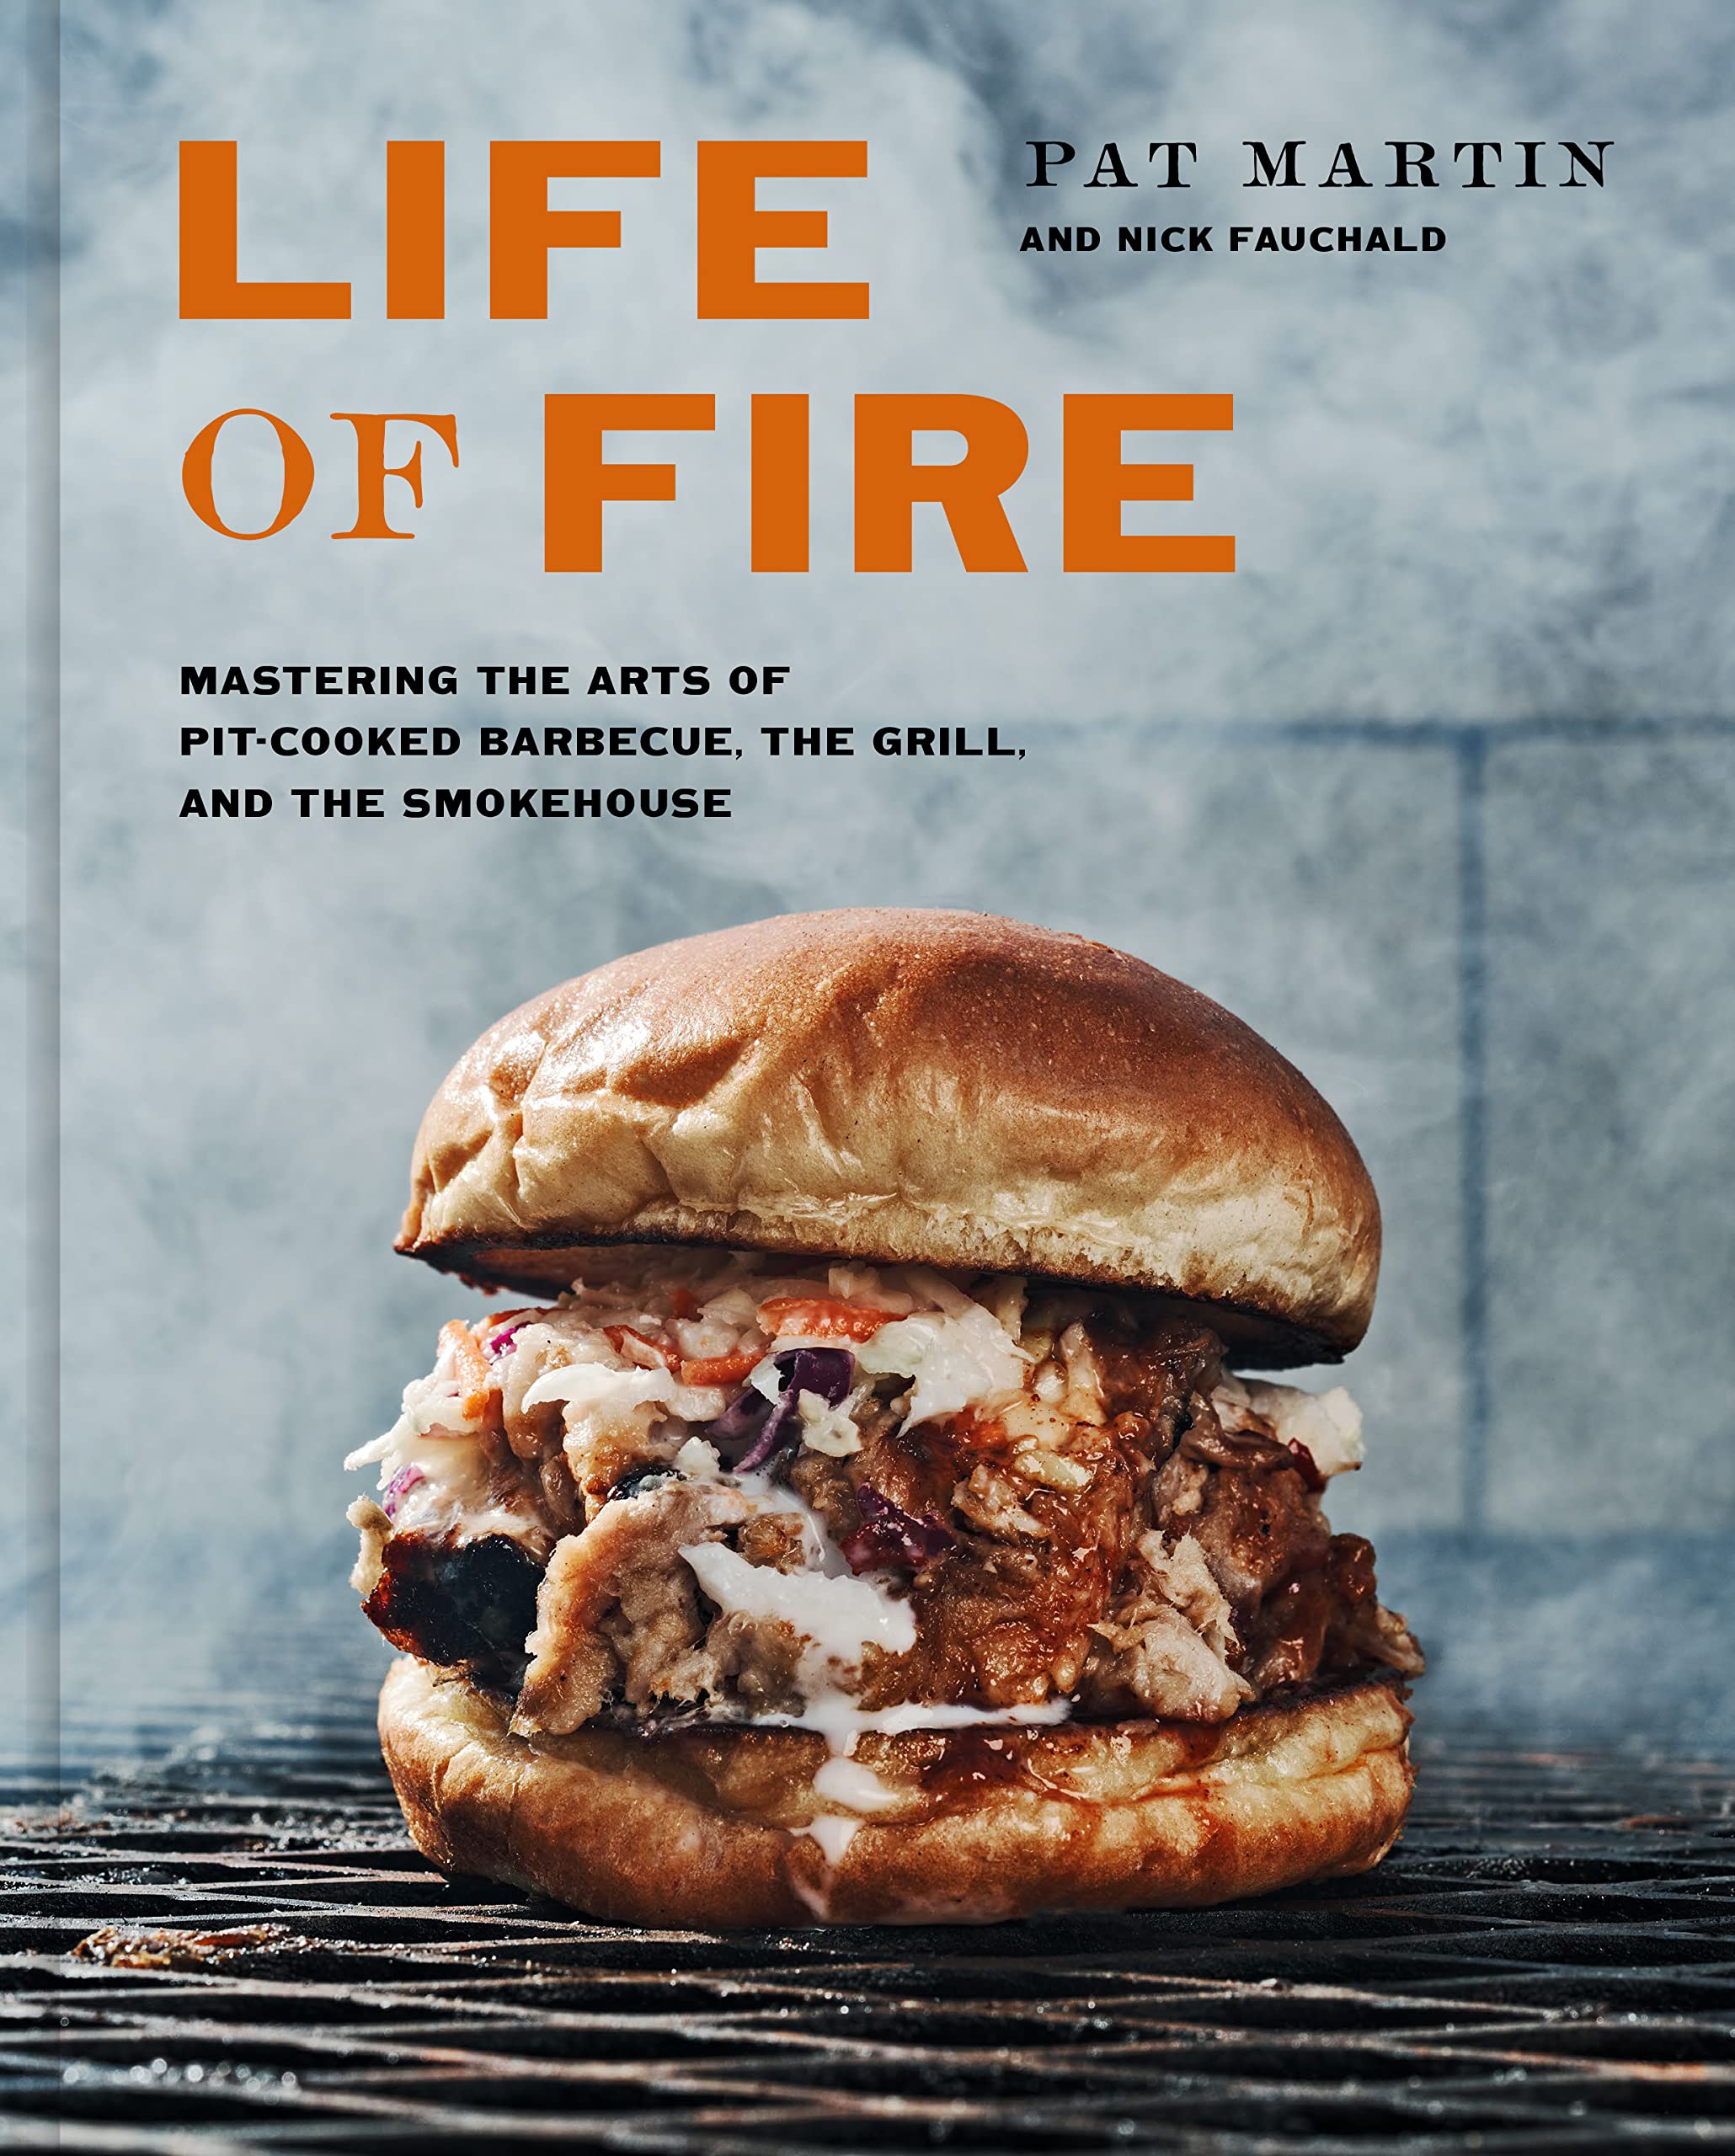 *Sale* Life of Fire: Mastering the Arts of Pit-Cooked Barbecue, the Grill, and the Smokehouse (Pat Martin, Nick Fauchald)